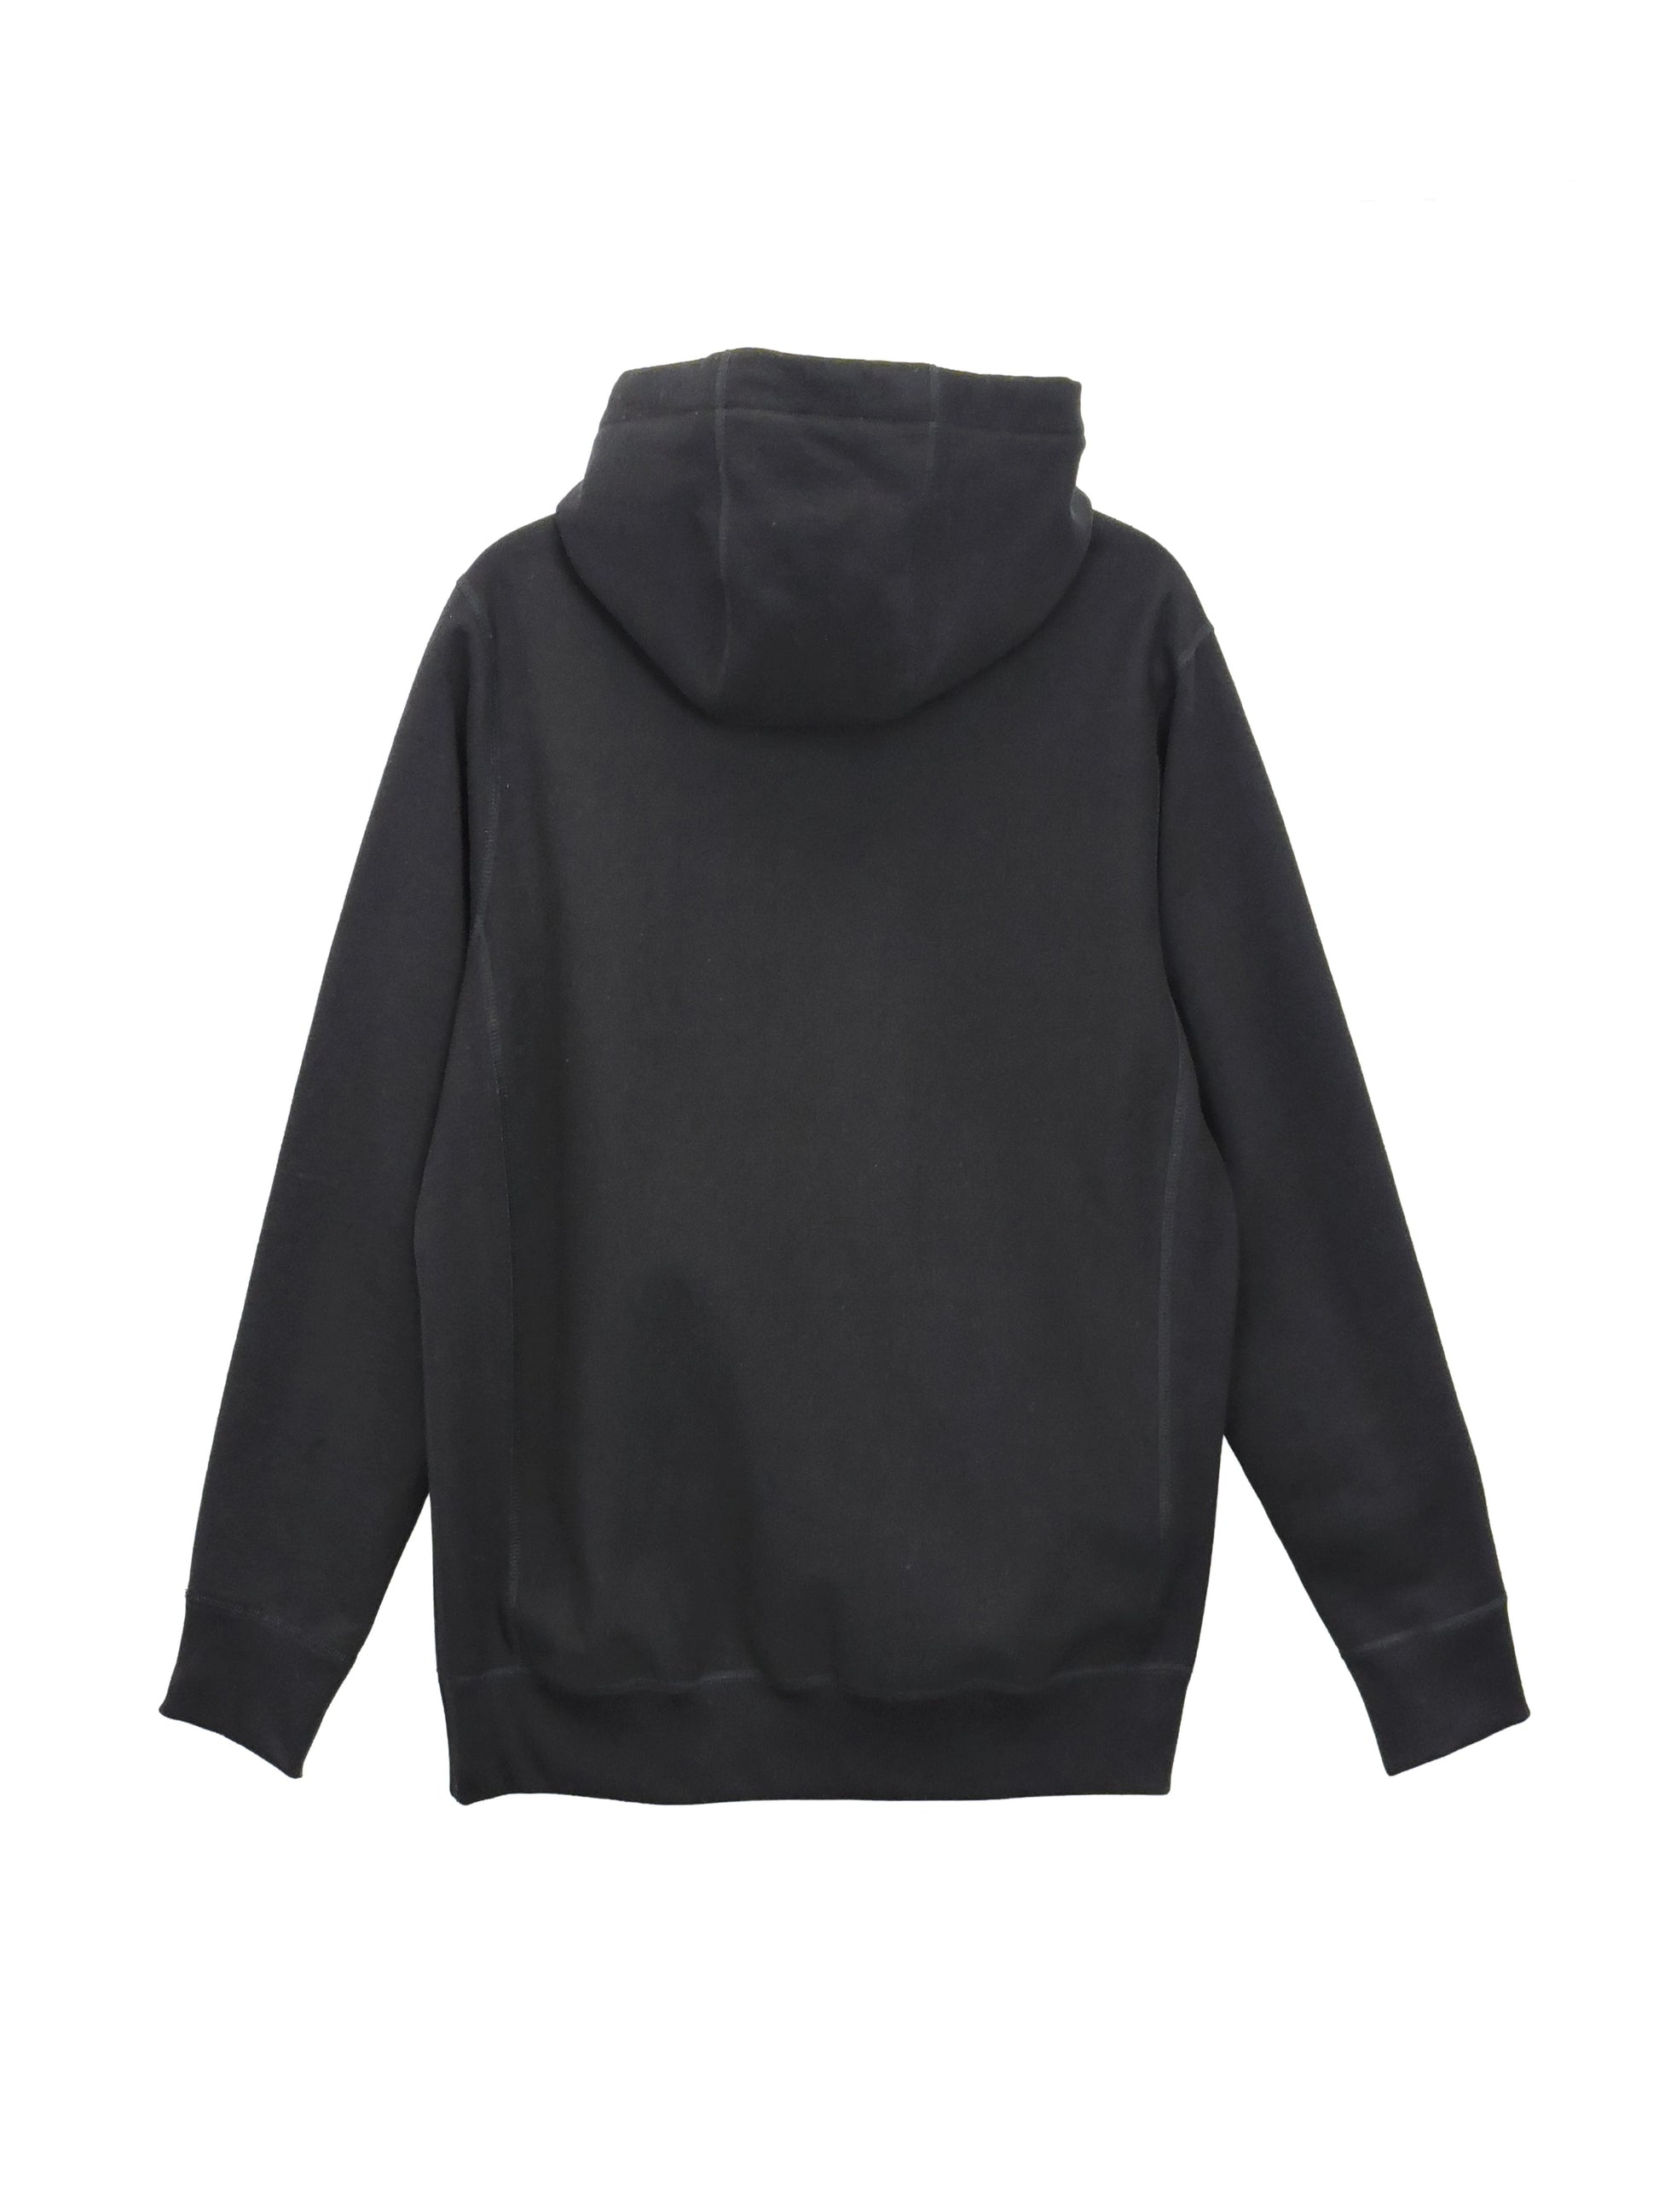 Black French Terry Hoodie, 500 GSM Organic Cotton